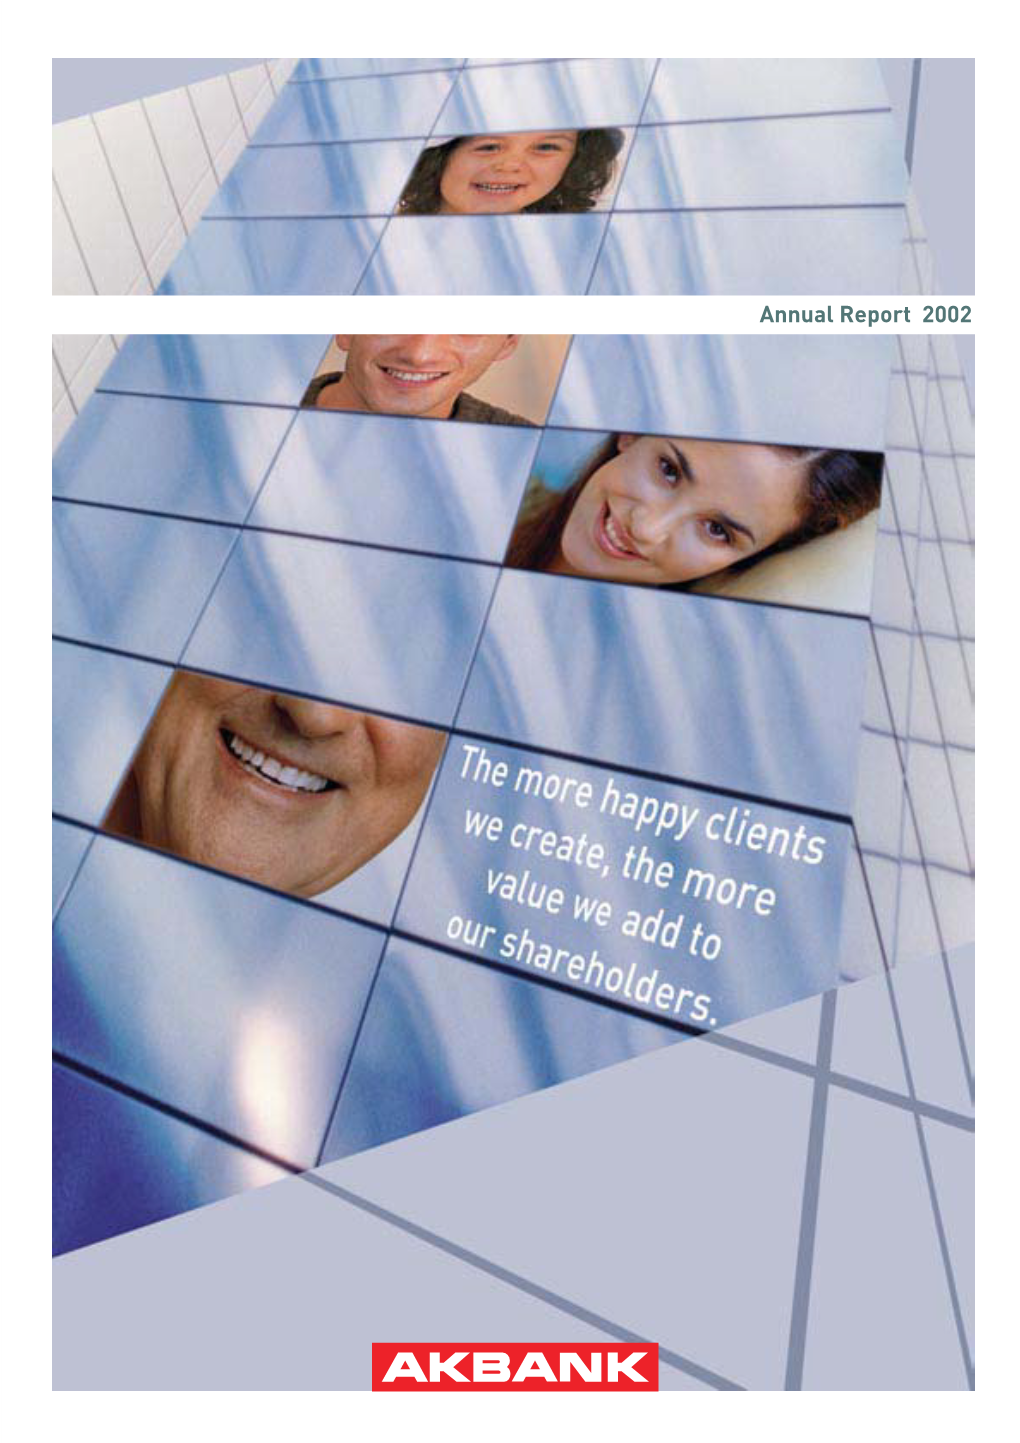 Annual Report 2002 the More Happy Clients We Create, the More Value We Add to Our Shareholders